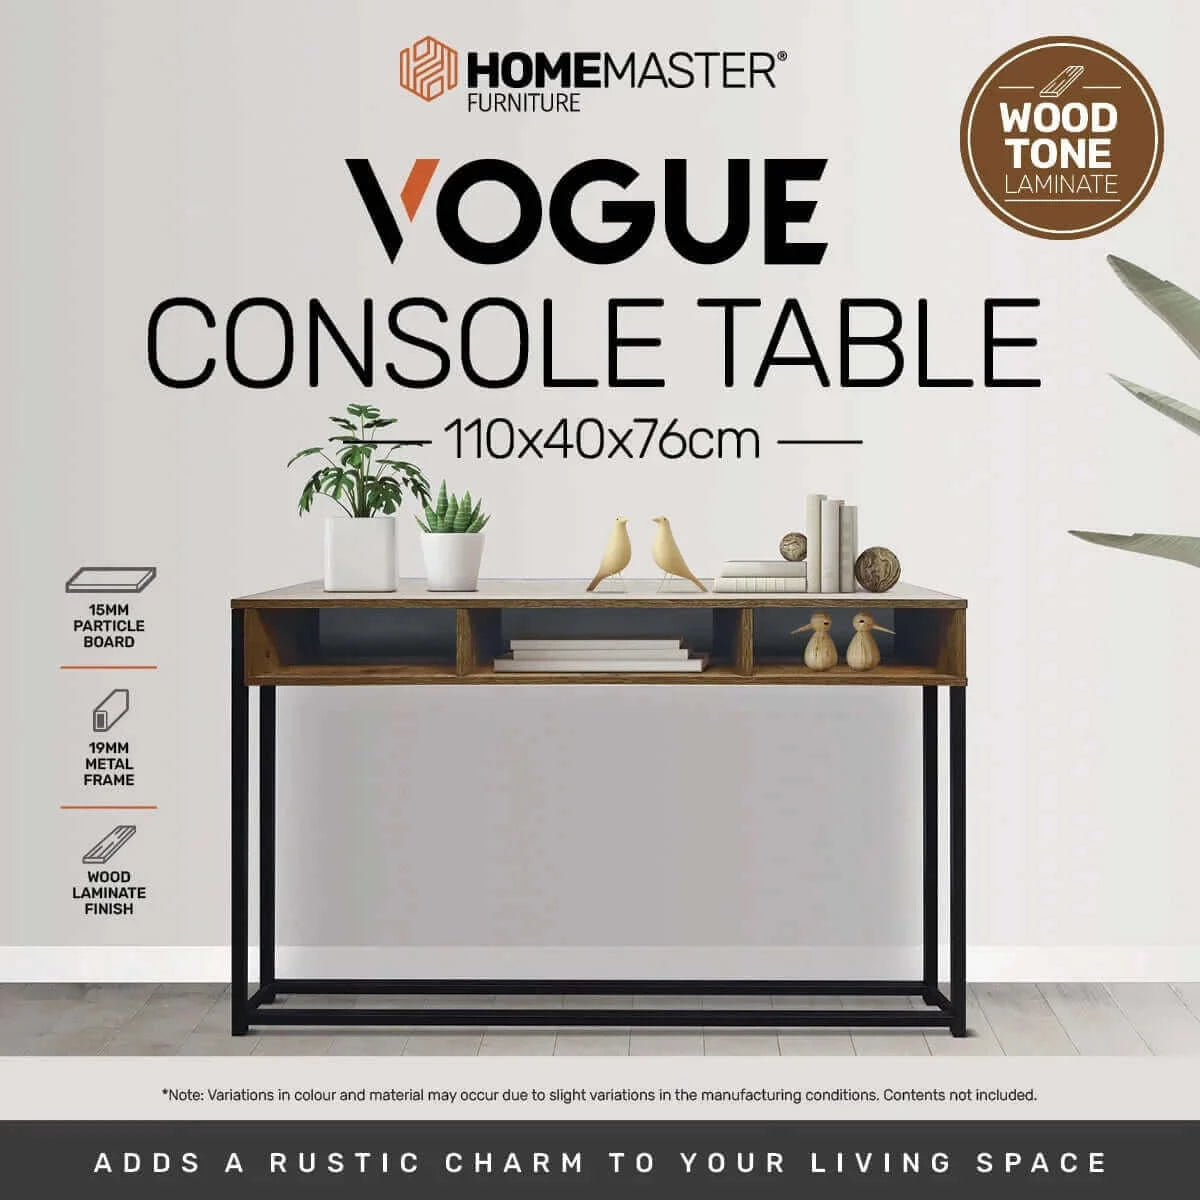 Buy home master vogue wood tone console table rustic flawless design 110cm - upinteriors-Upinteriors